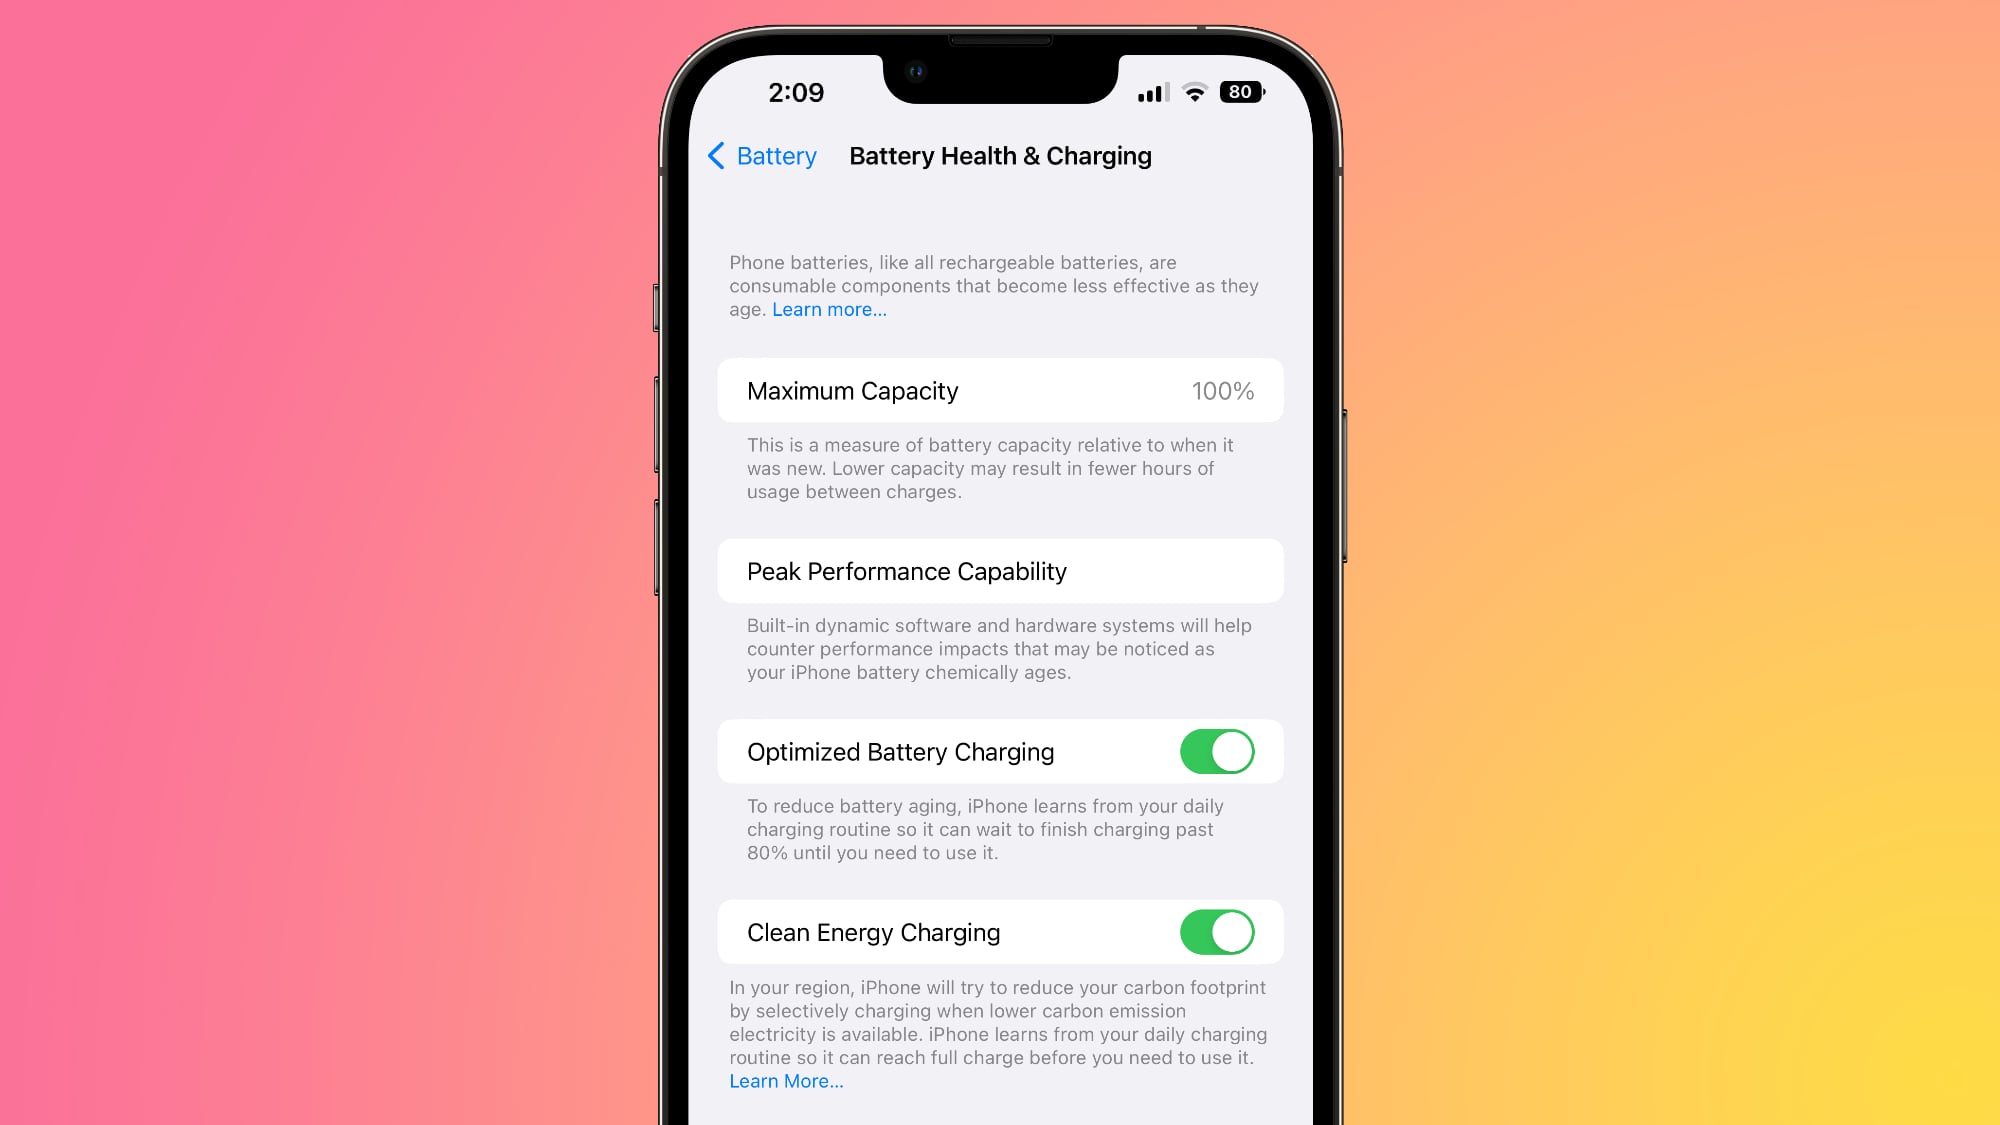 iOS 16.1 Beta Adds Clean Energy Charging Option to iPhone